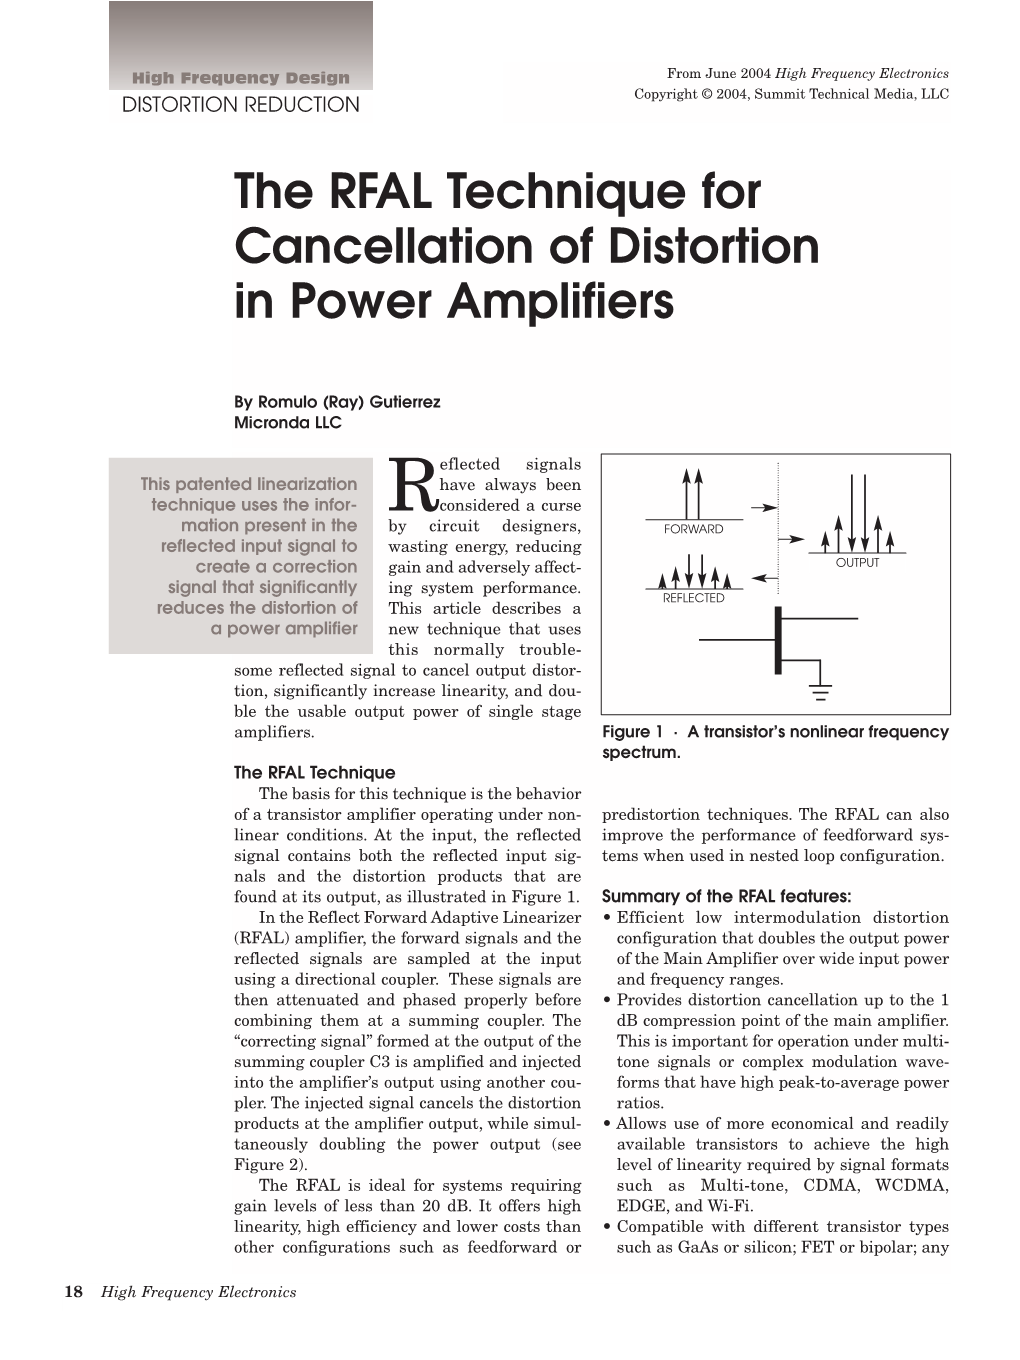 The RFAL Technique for Cancellation of Distortion in Power Amplifiers